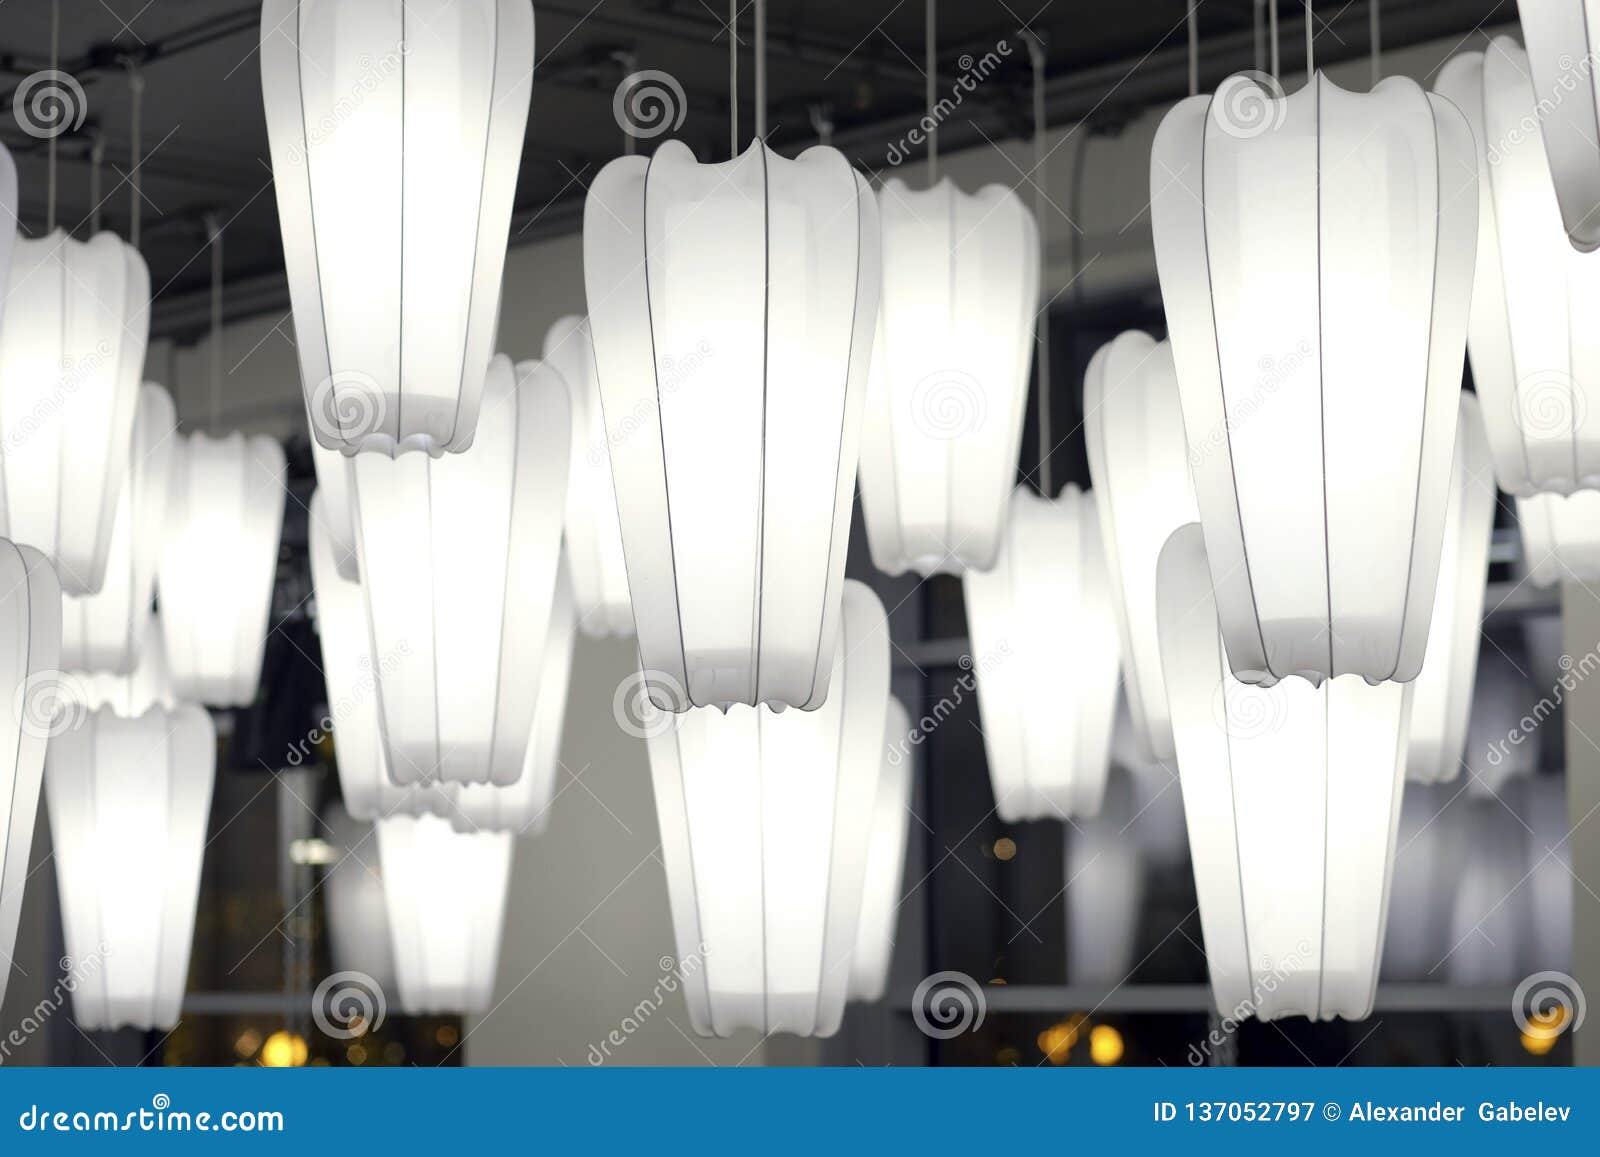 White Paper Lamp Hanging On The Ceiling In Dark Tone Stock